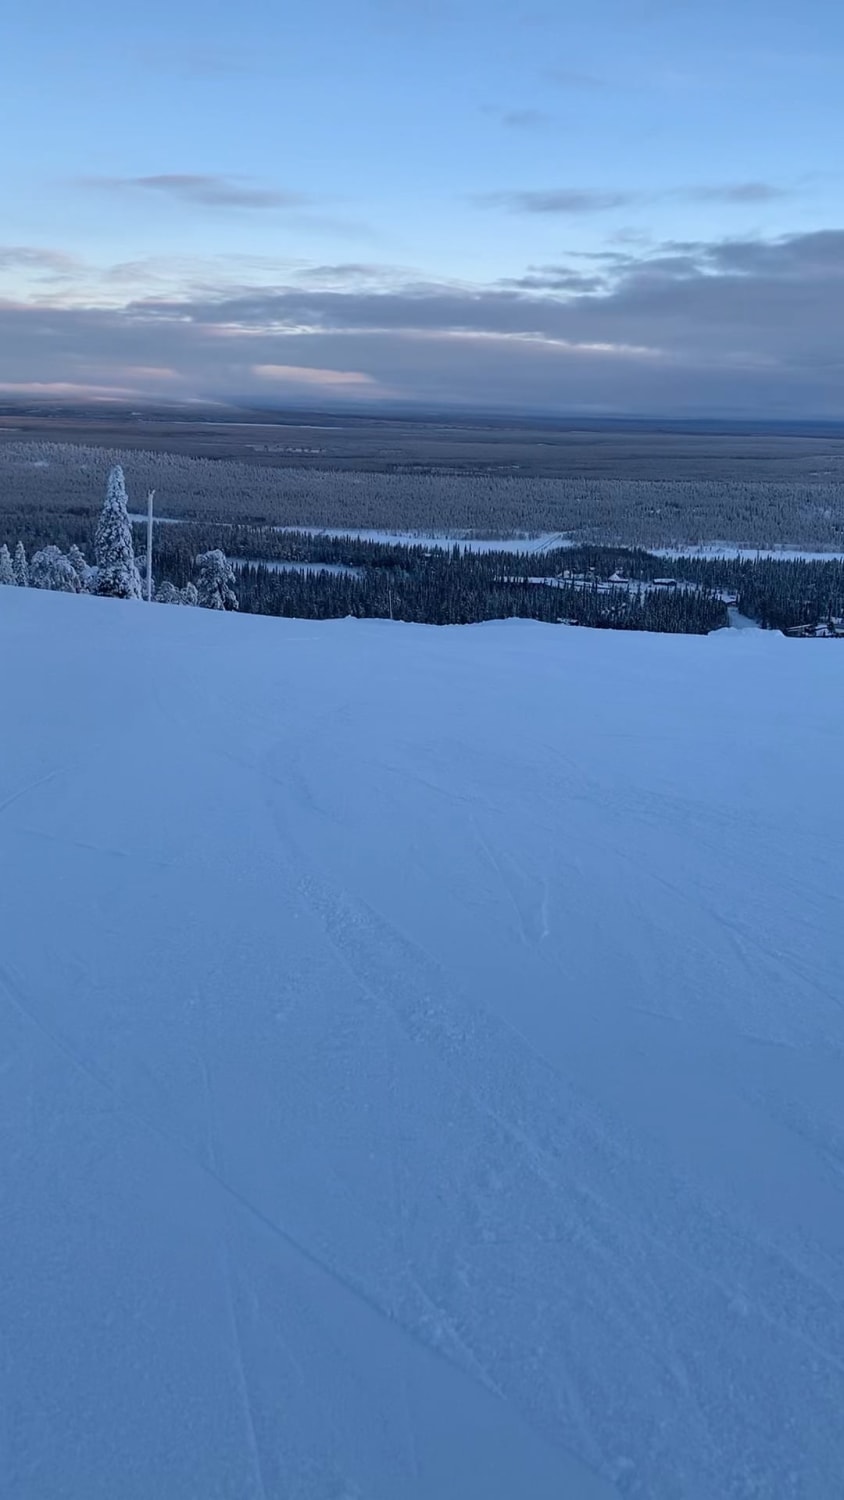 Only a beginner skier but the empty slopes and early sunsets of Finnish Lapland make for a great place to start 😎